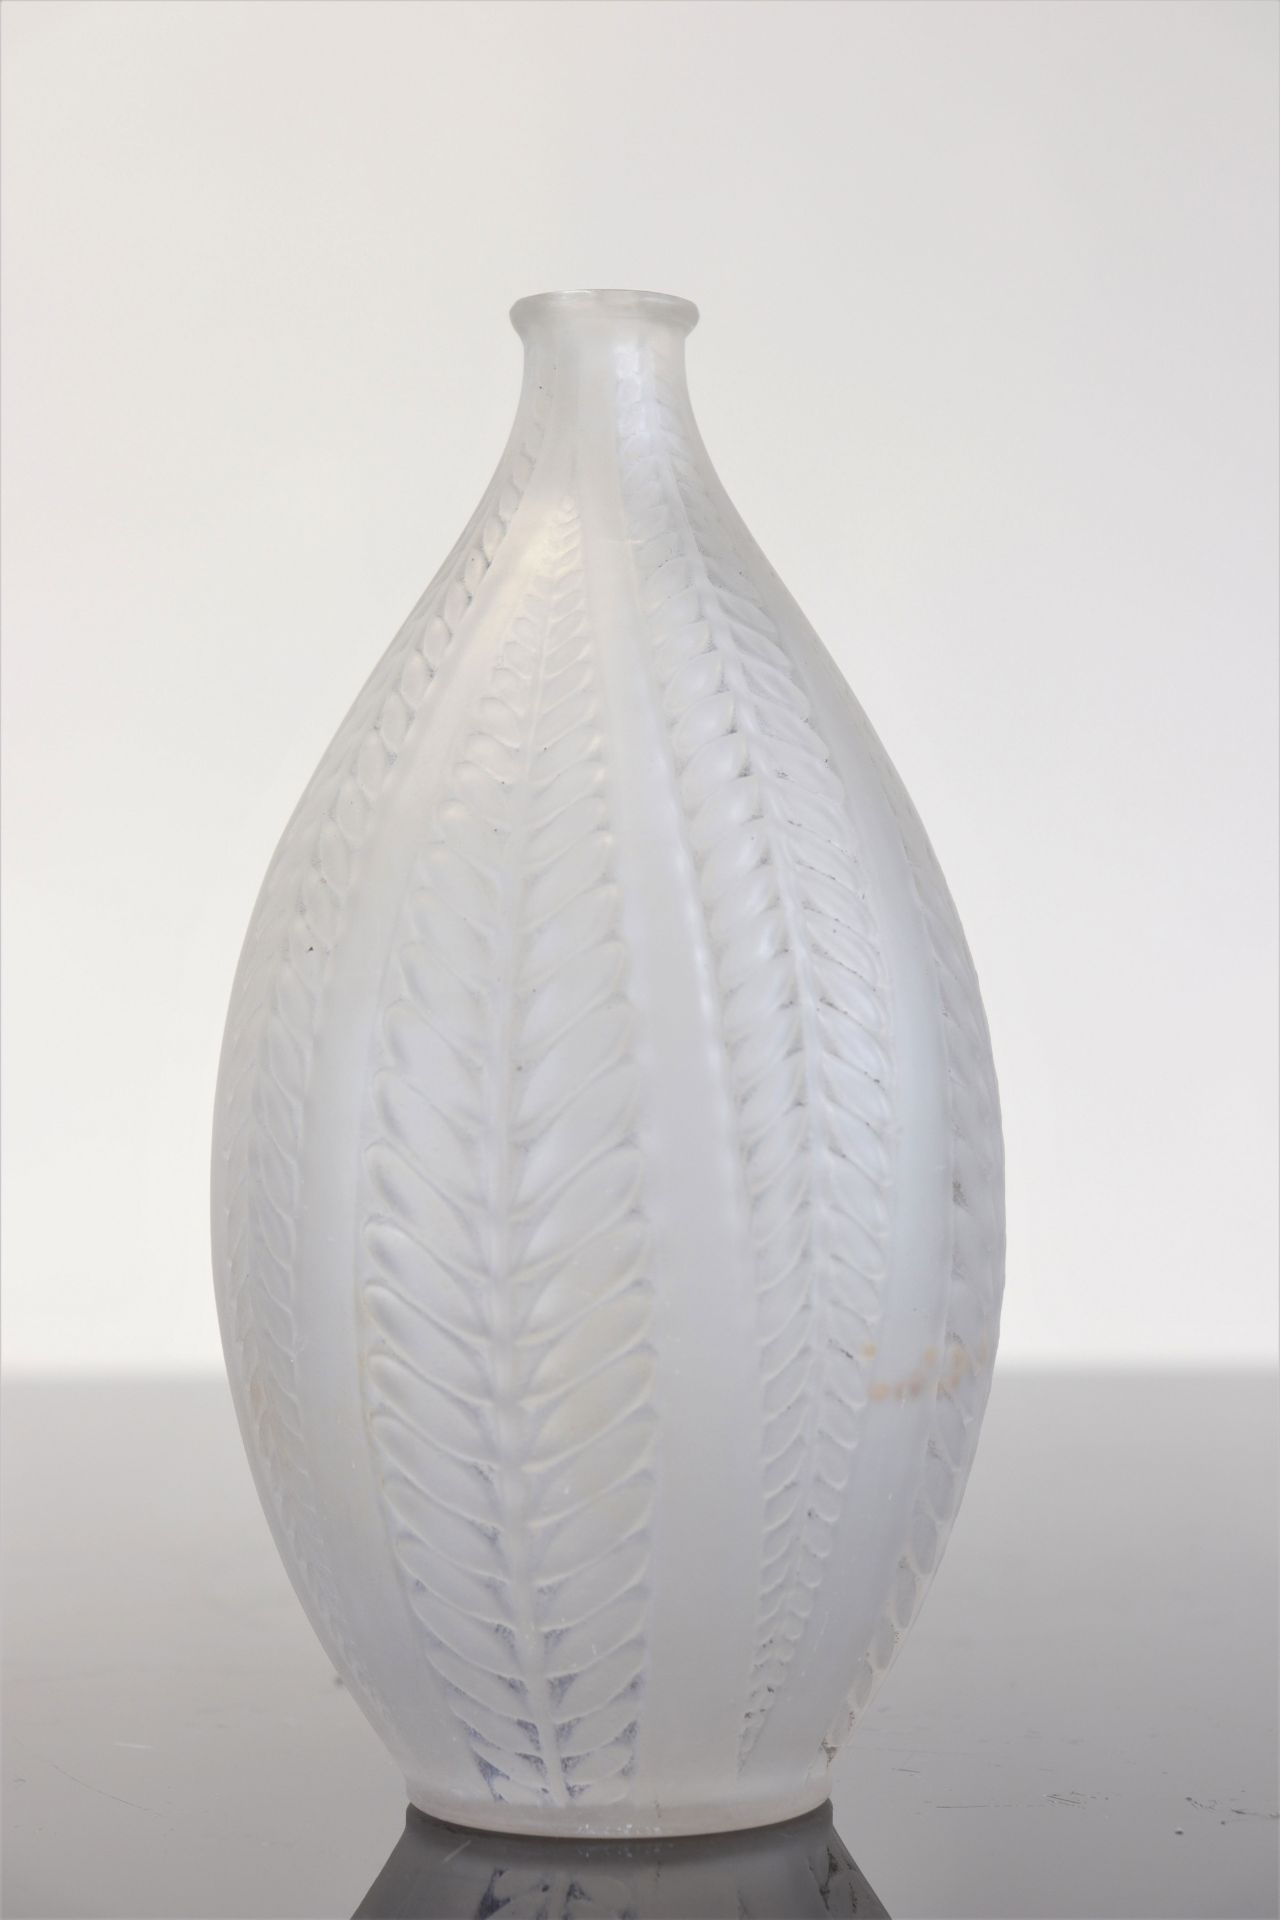 RenÃ© LALIQUE (1860-1945) Acacia, model created in 1921 - Image 3 of 4